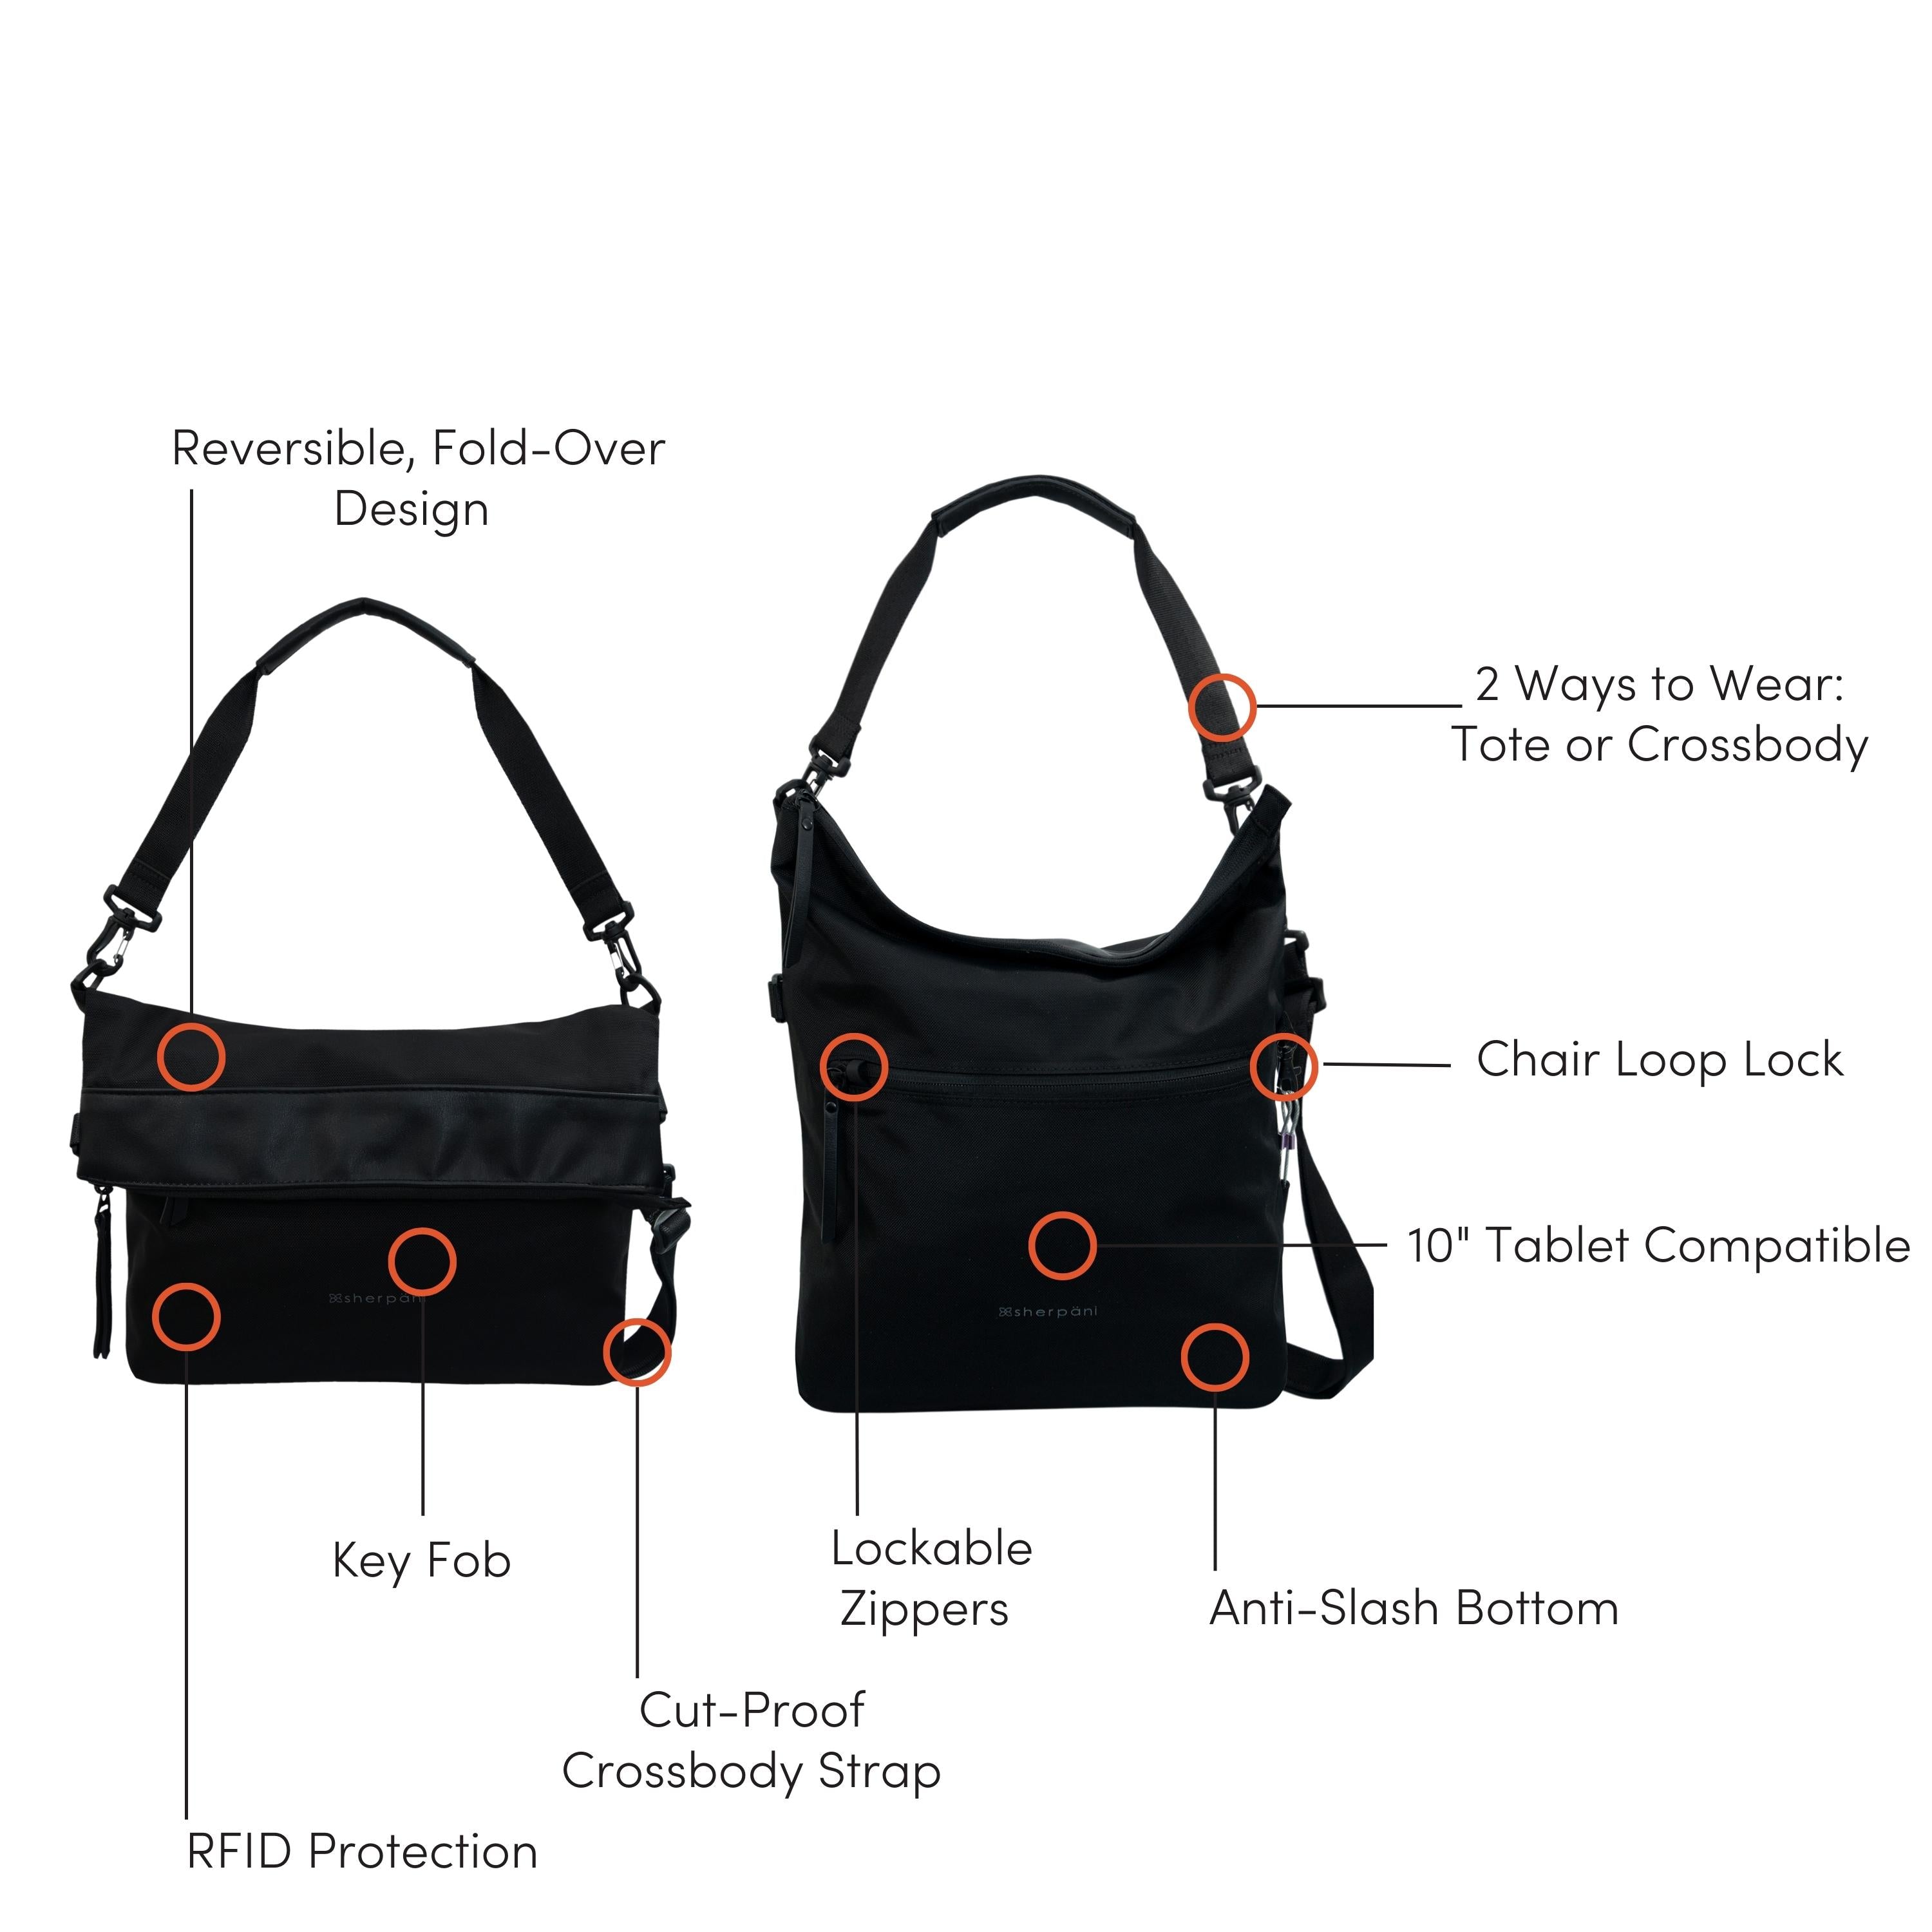 Graphic showcasing the features of Sherpani’s Anti Theft bag, the Vale AT in Carbon. The bag is shown two ways: closed and folded over, open and standing tall. Red circles highlight the following features: Reversible, Fold-Over Design, 2 Ways to Wear: Tote or Crossbody, Chair Loop Lock, 1” Tablet Compatible, Anti-Slash Bottom, Lockable Zippers, RFID Protection, Key Fob, Cut-Proof Crossbody Strap. 